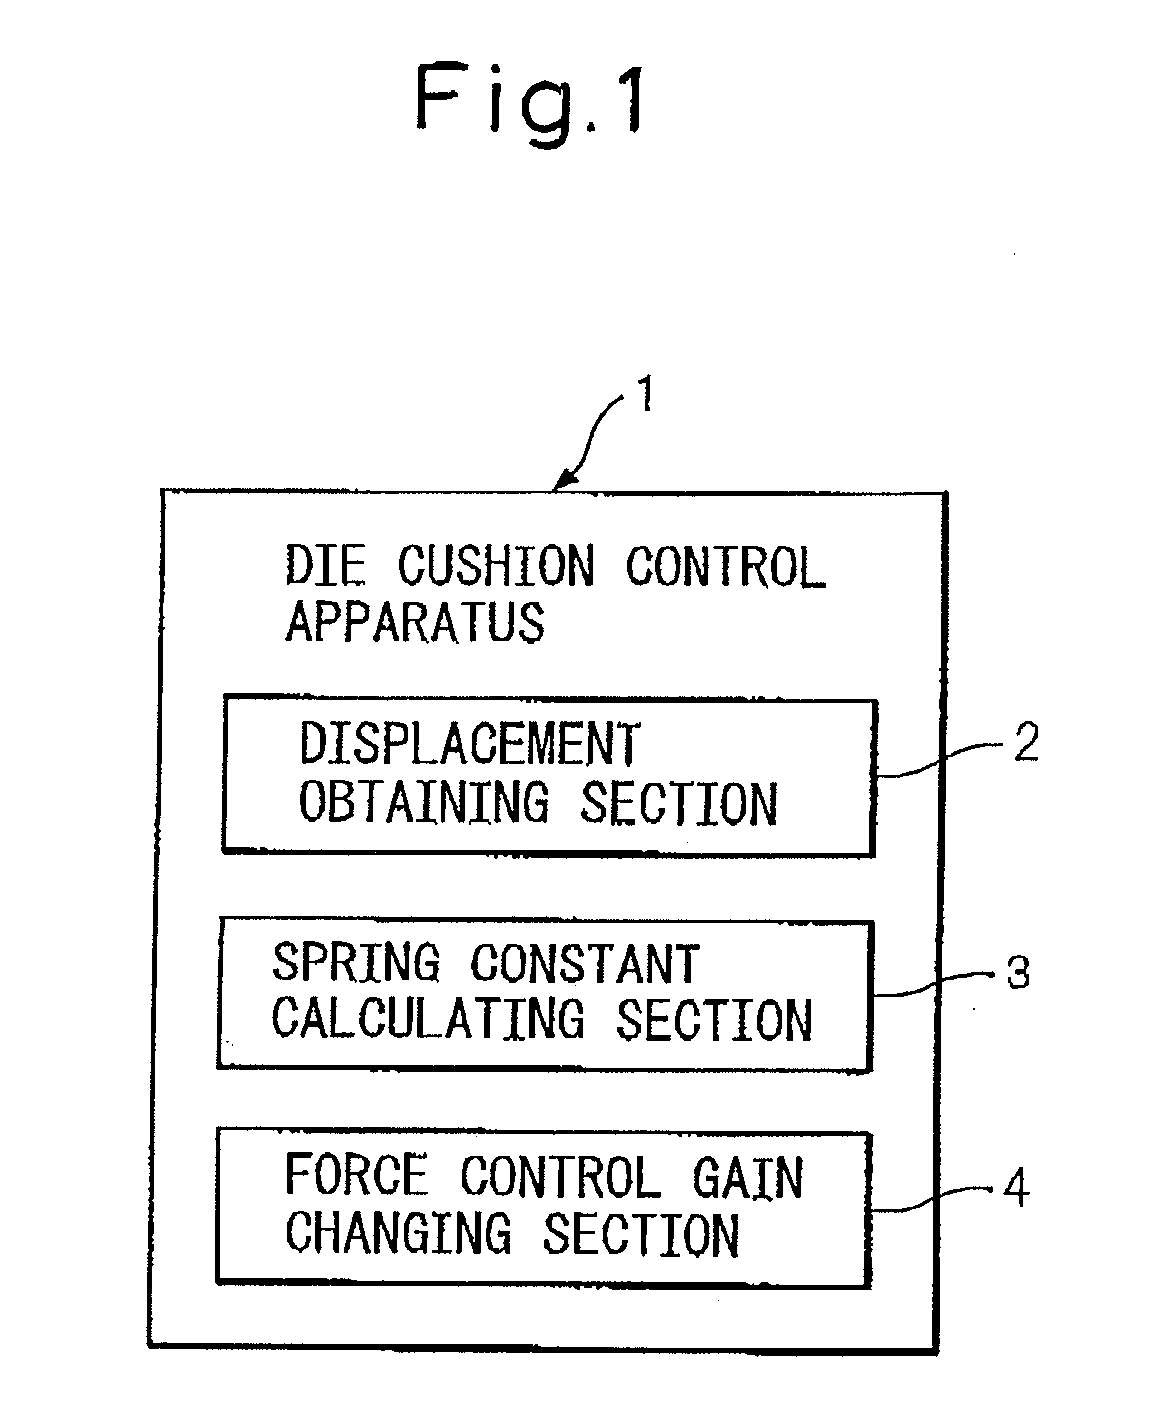 Method for changing force control gain and die cushion control apparatus